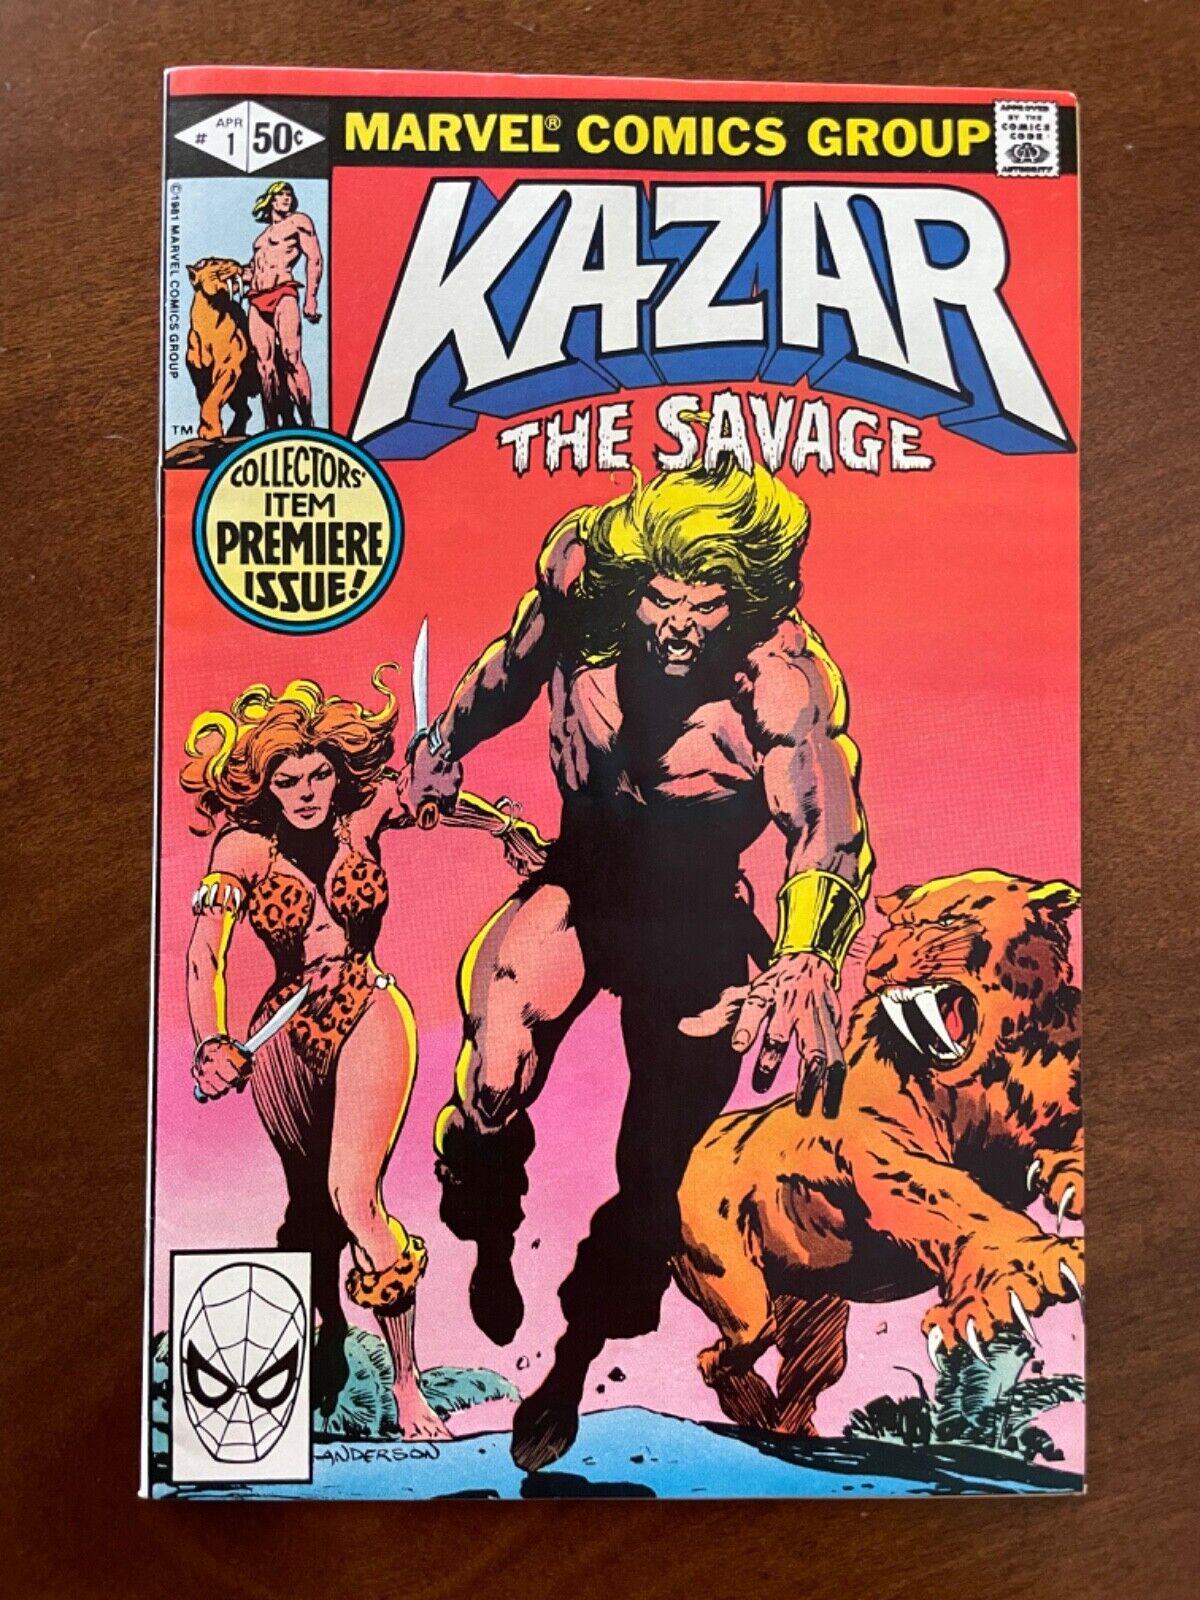 Ka-Zar the Savage, #1-25 (Lot of 25), Marvel (1982) - VF/NM (9.0) or Higher